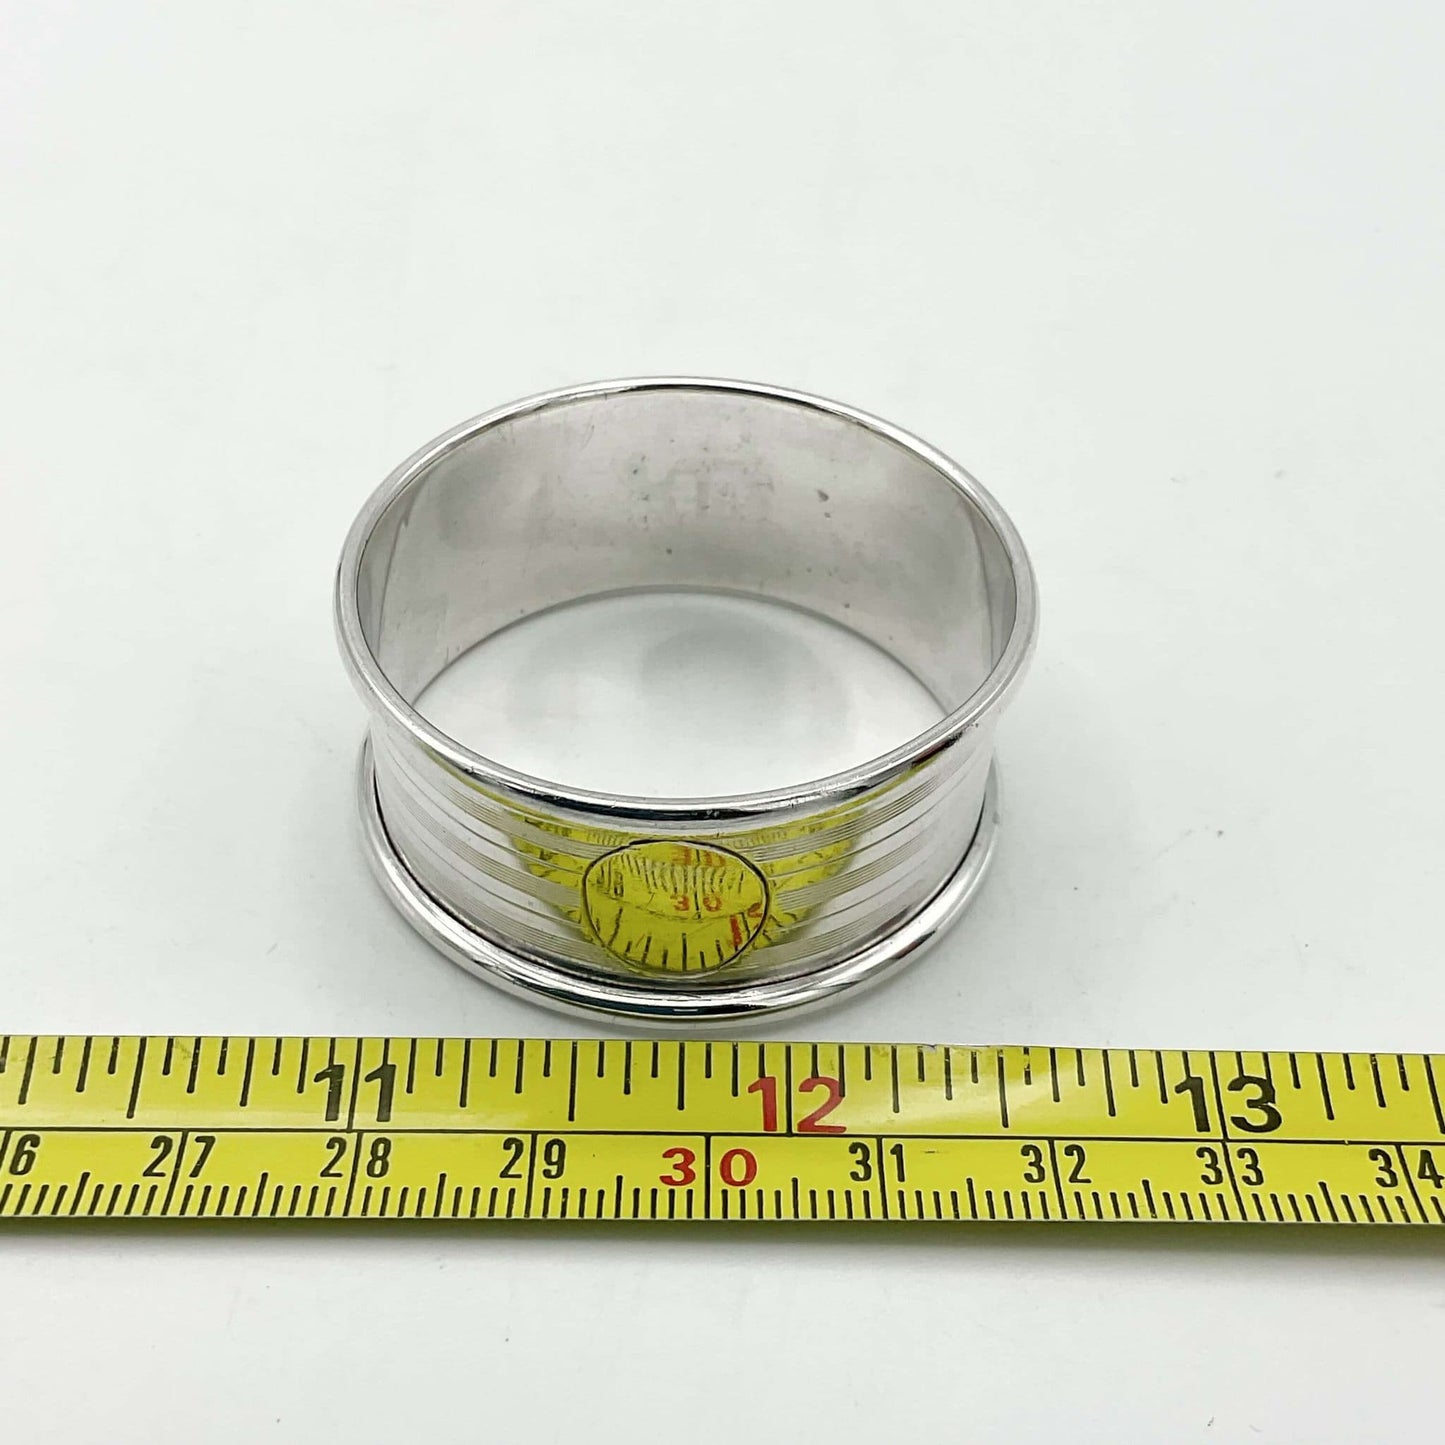 Antique 1922 Sterling Silver Napkin Ring